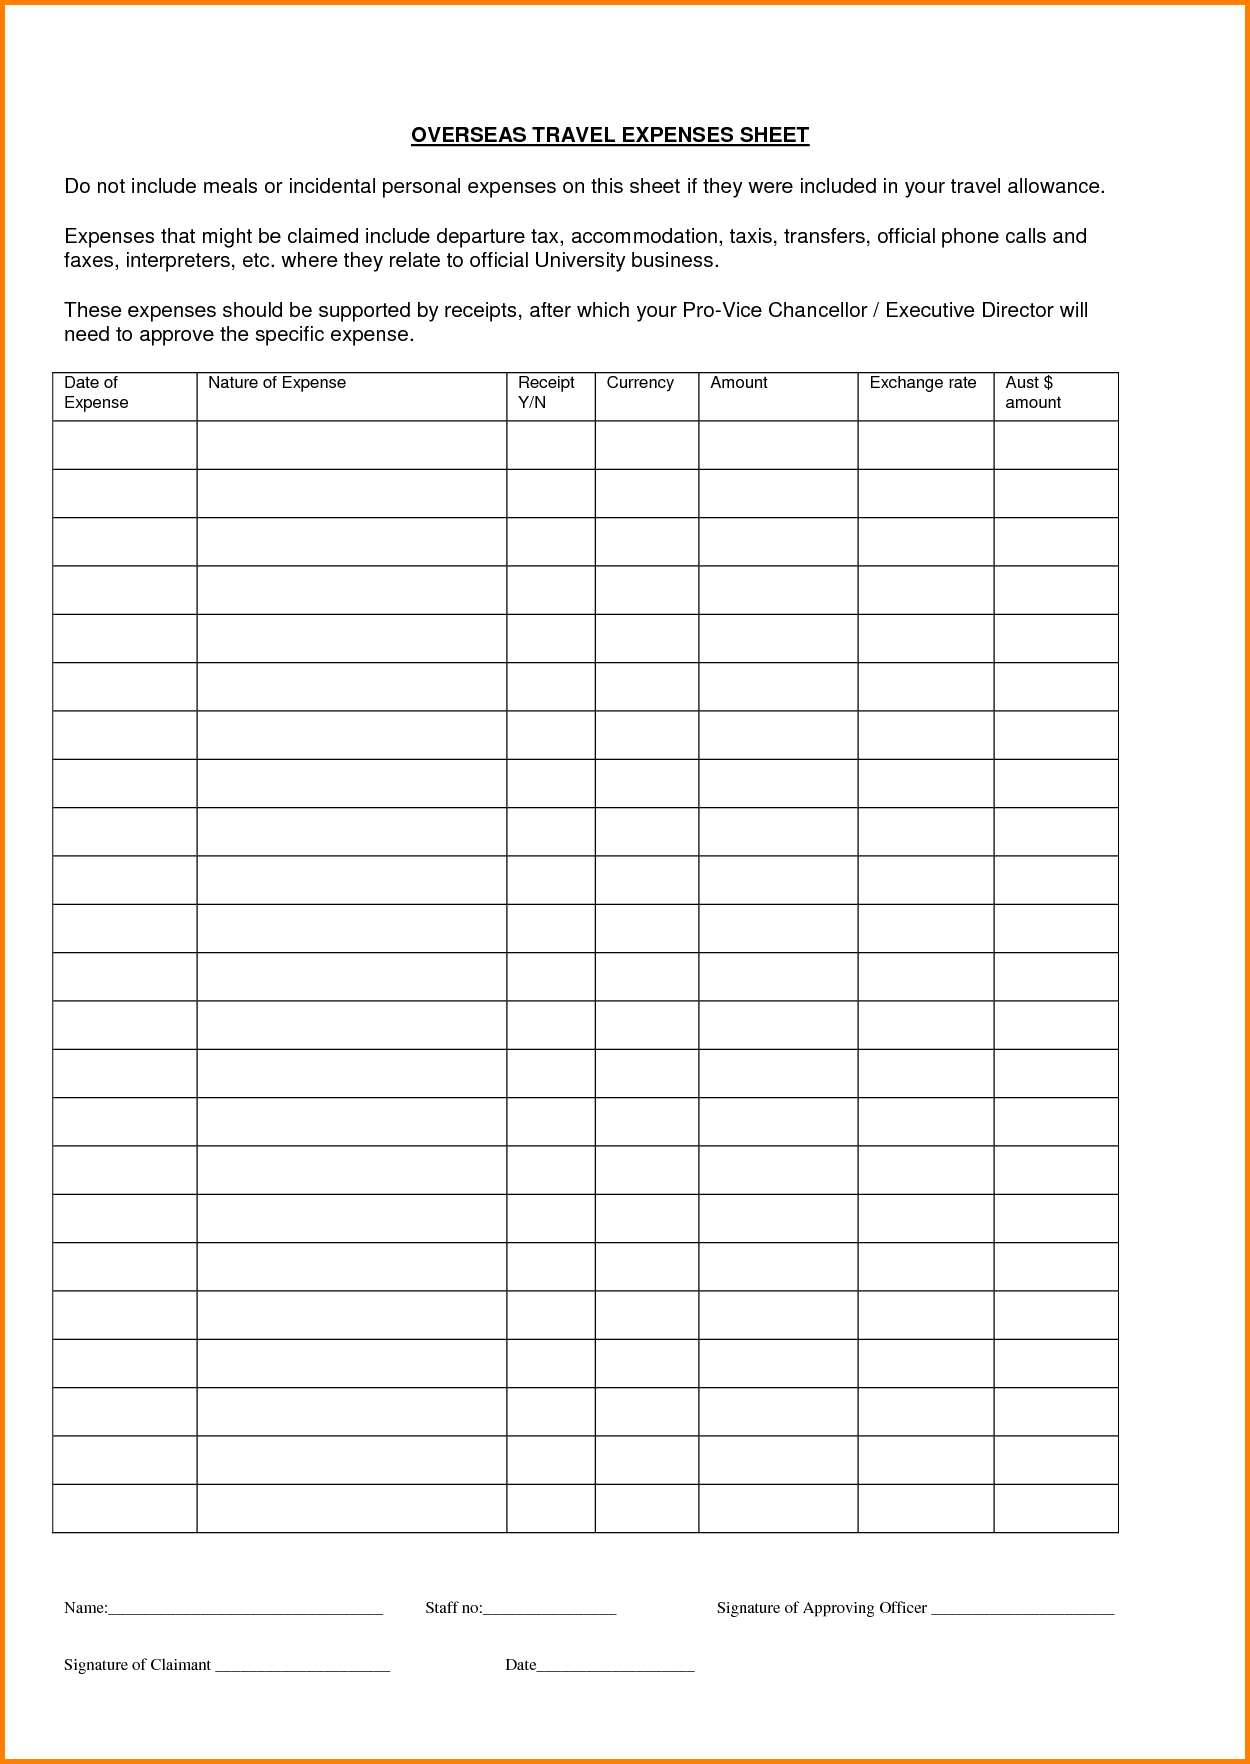 Expenses Claim Form Template Free - Durun.ugrasgrup and Business Expenses Claim Form Template